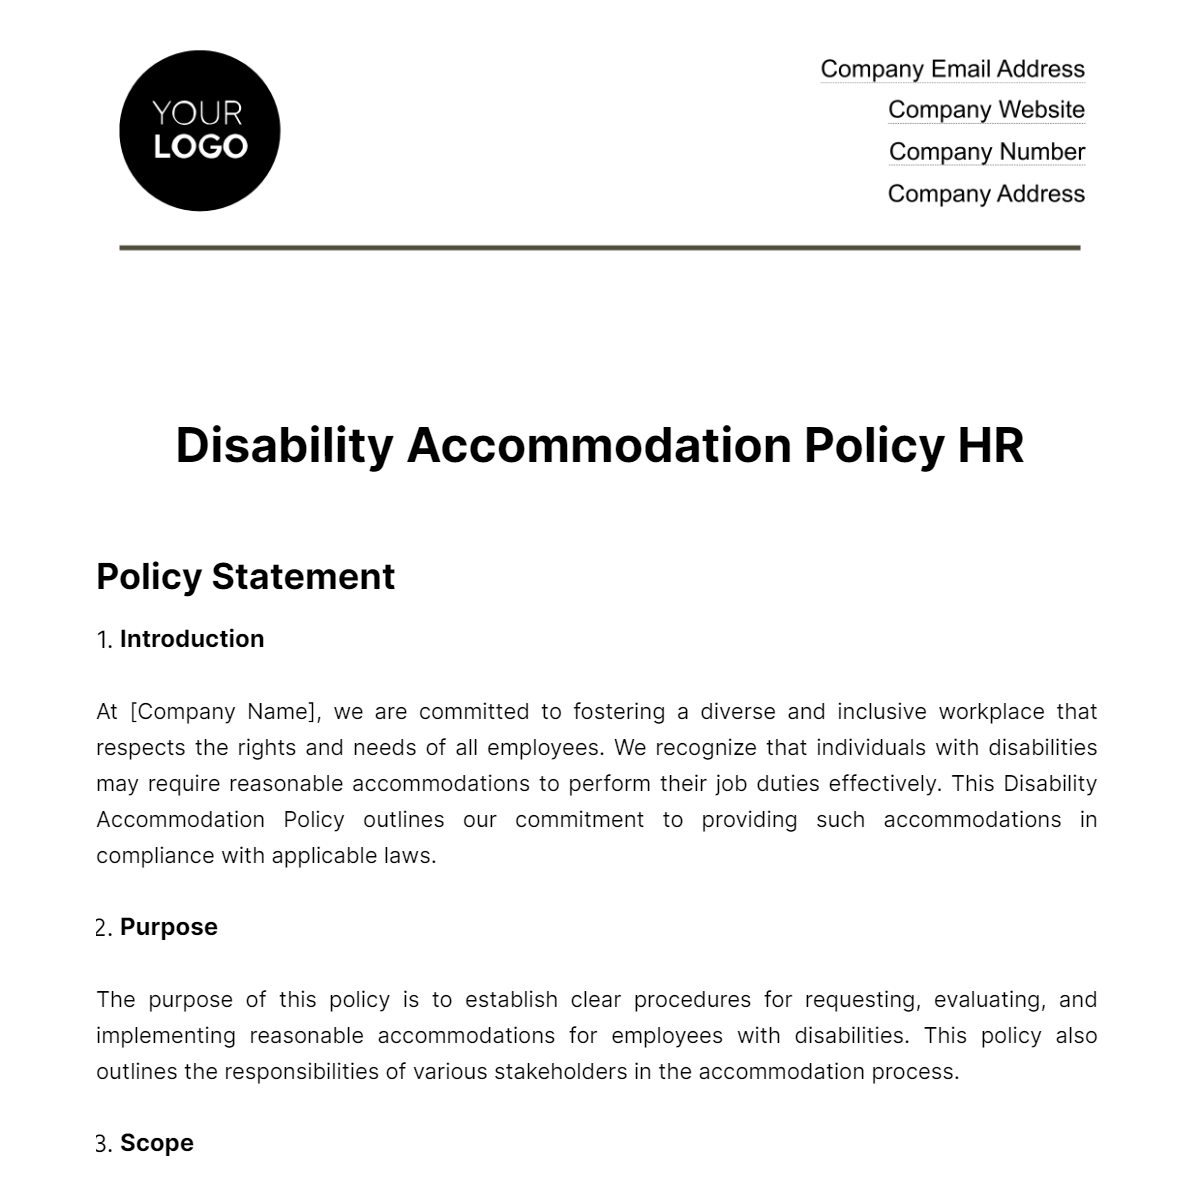 Disability Accommodation Policy HR Template